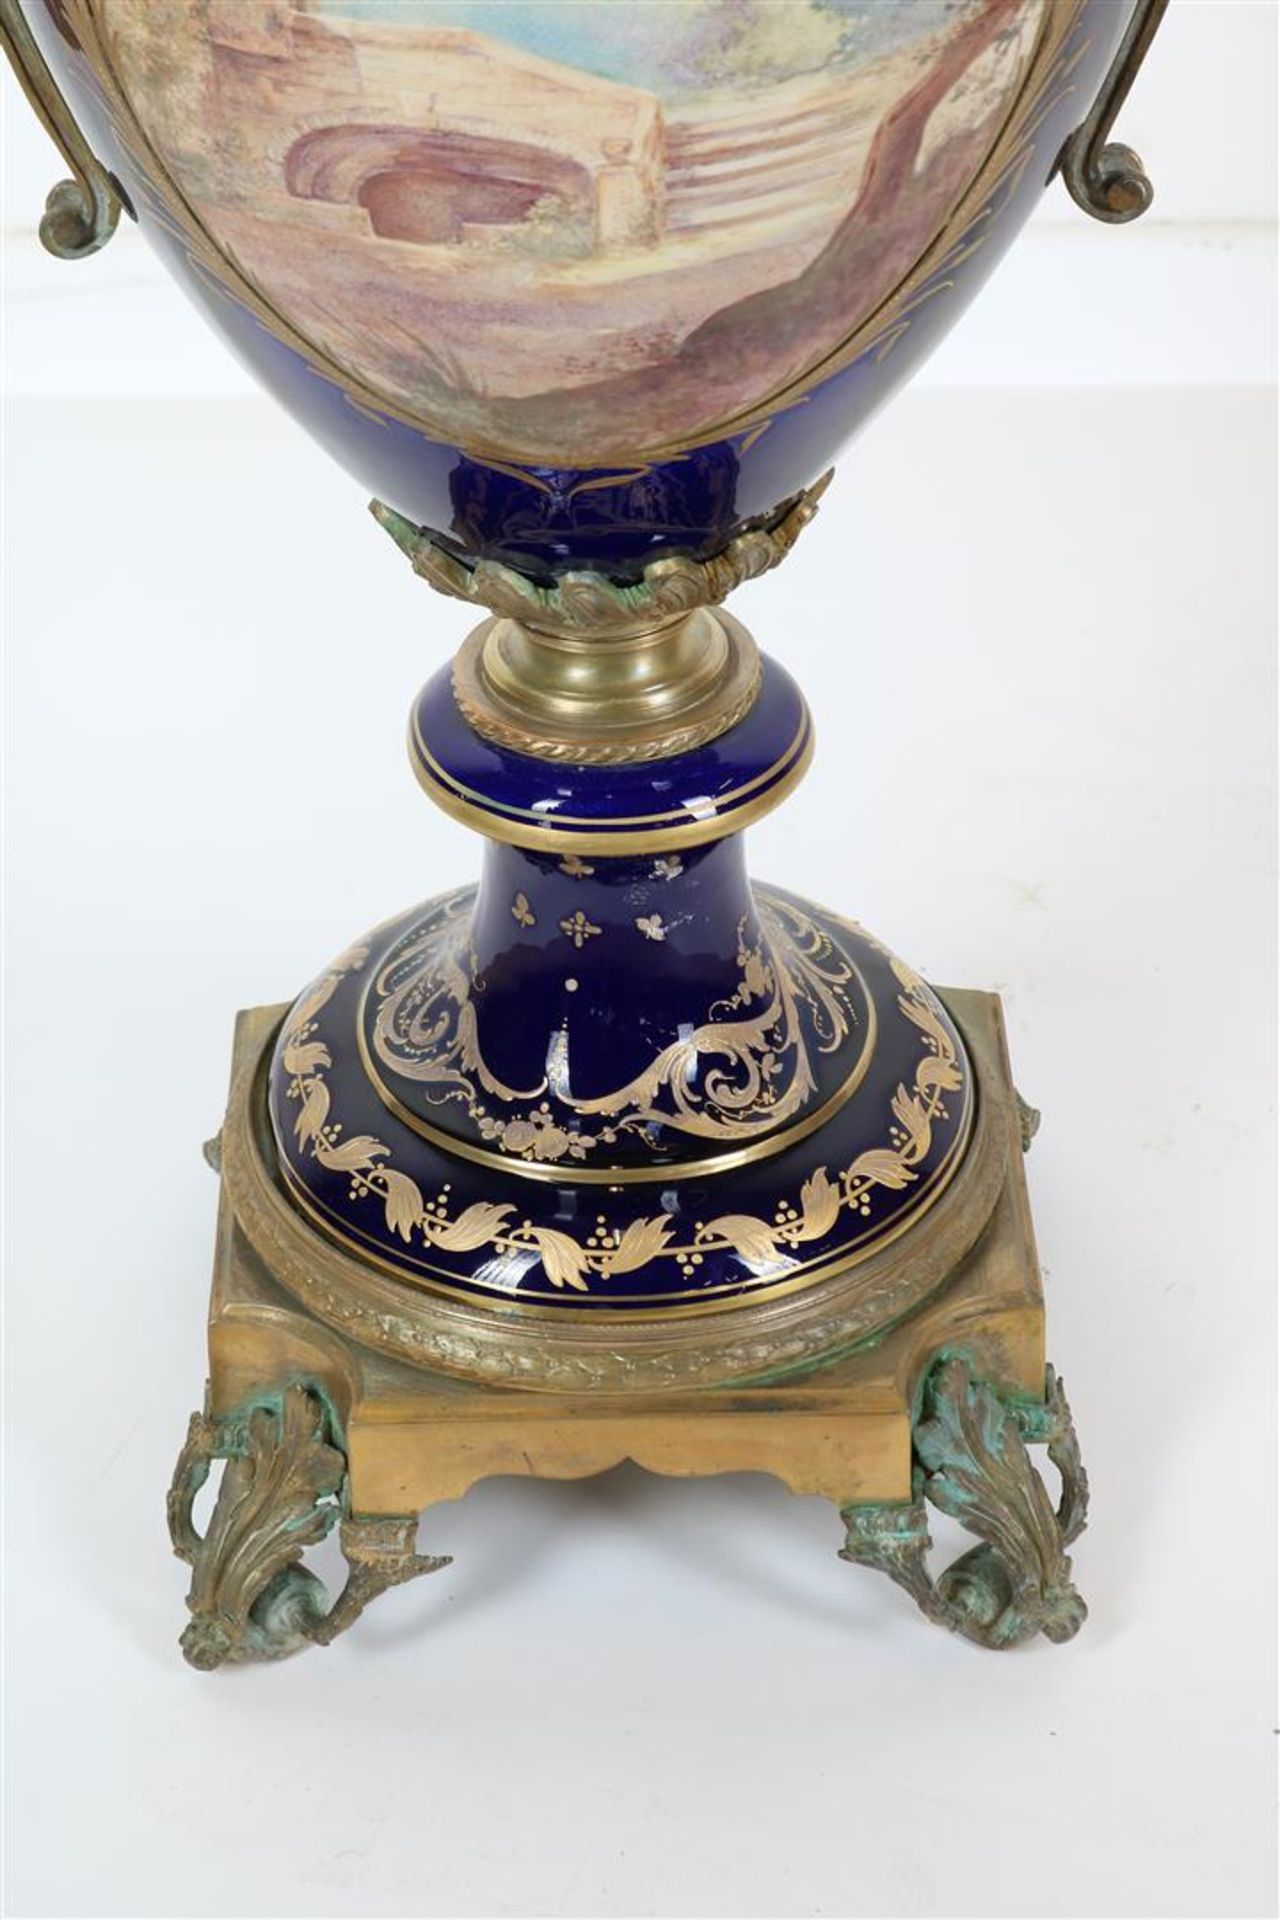 Porcelain Sevres urn vase with fixed lid, double painted decor of romantic scene of figures in - Image 8 of 8